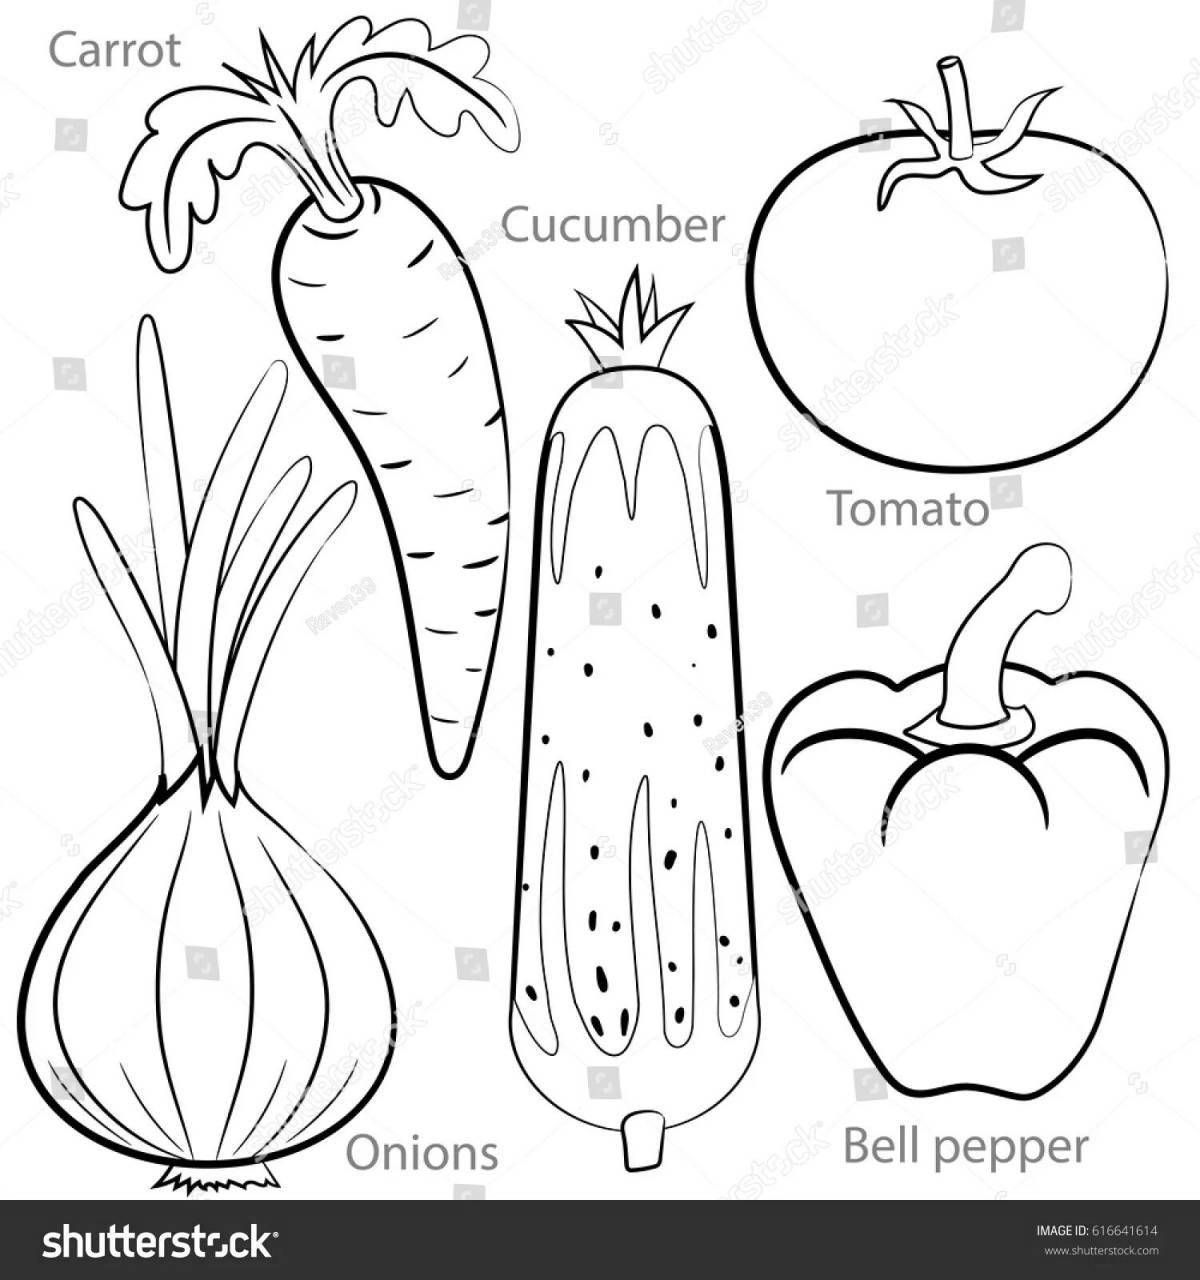 Great pre-k cucumber and tomato coloring pages